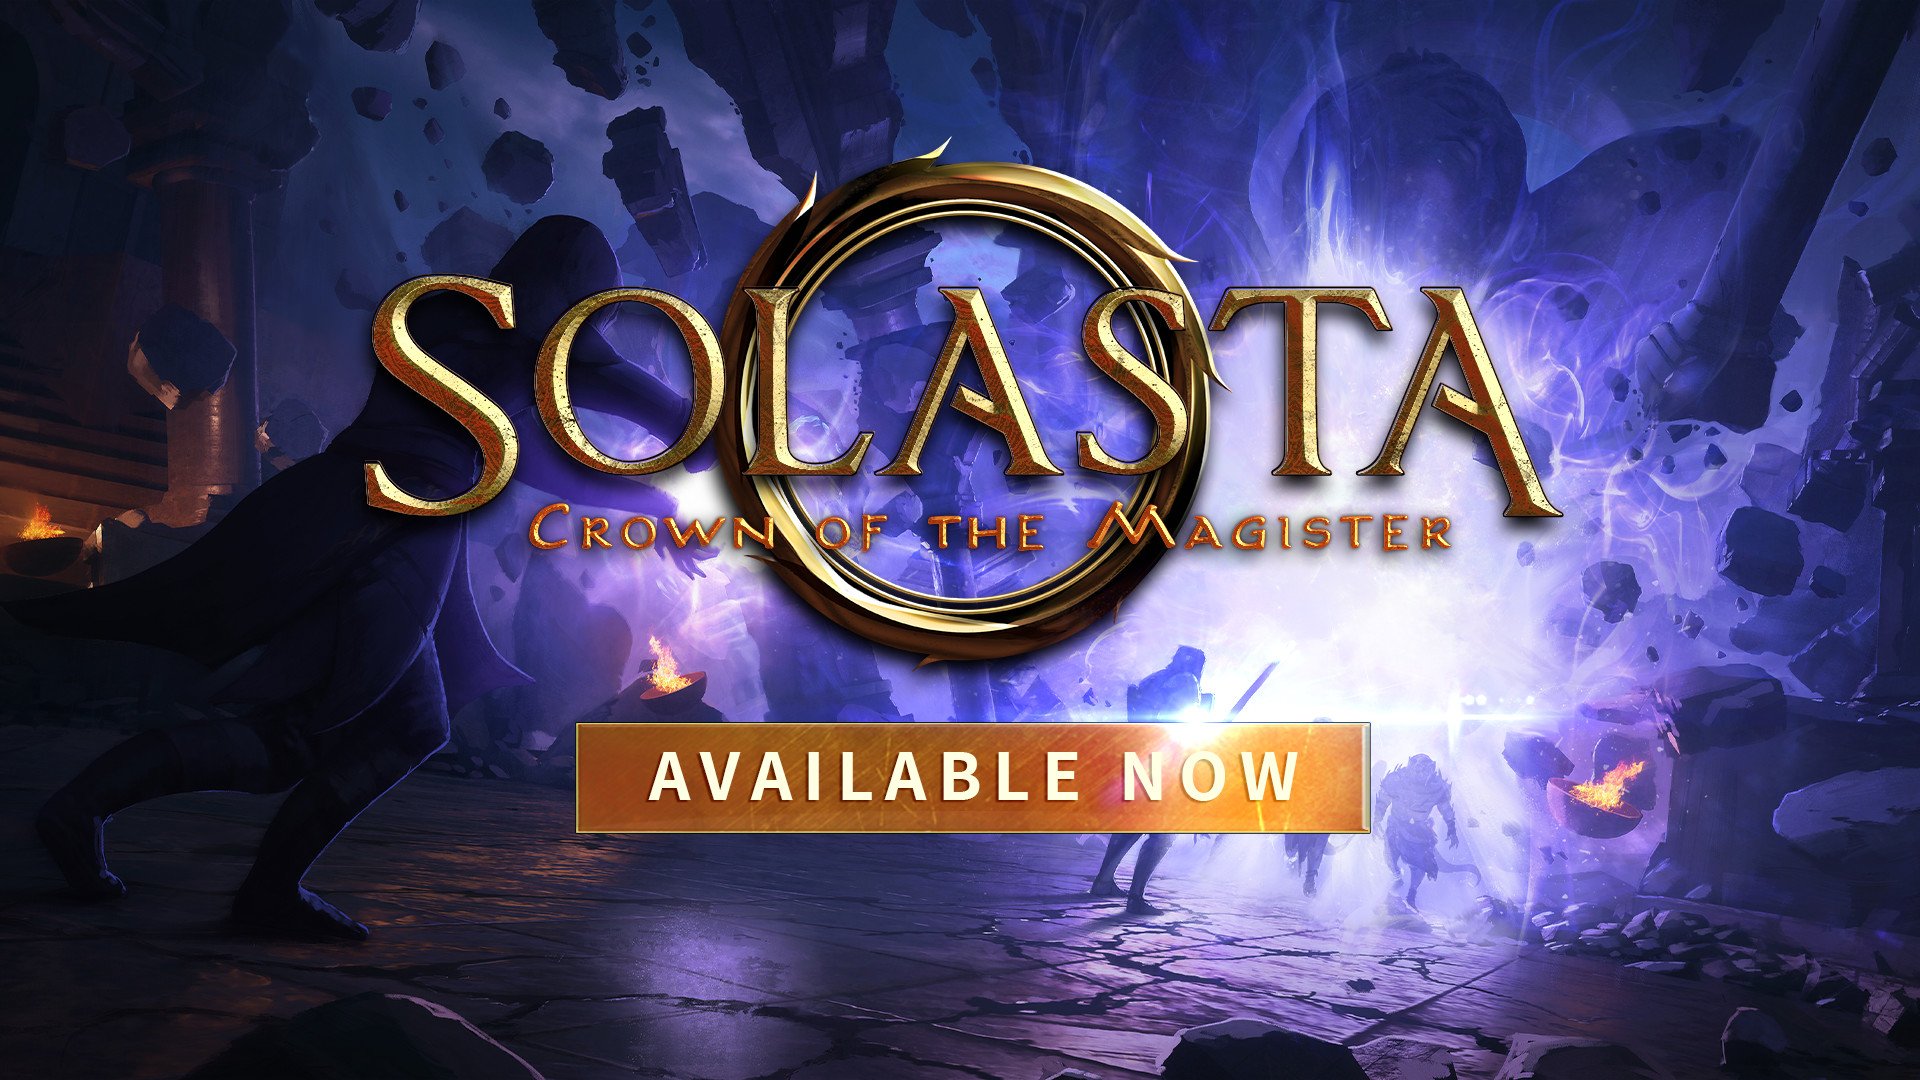 Solasta Early Access available NOW on Steam!